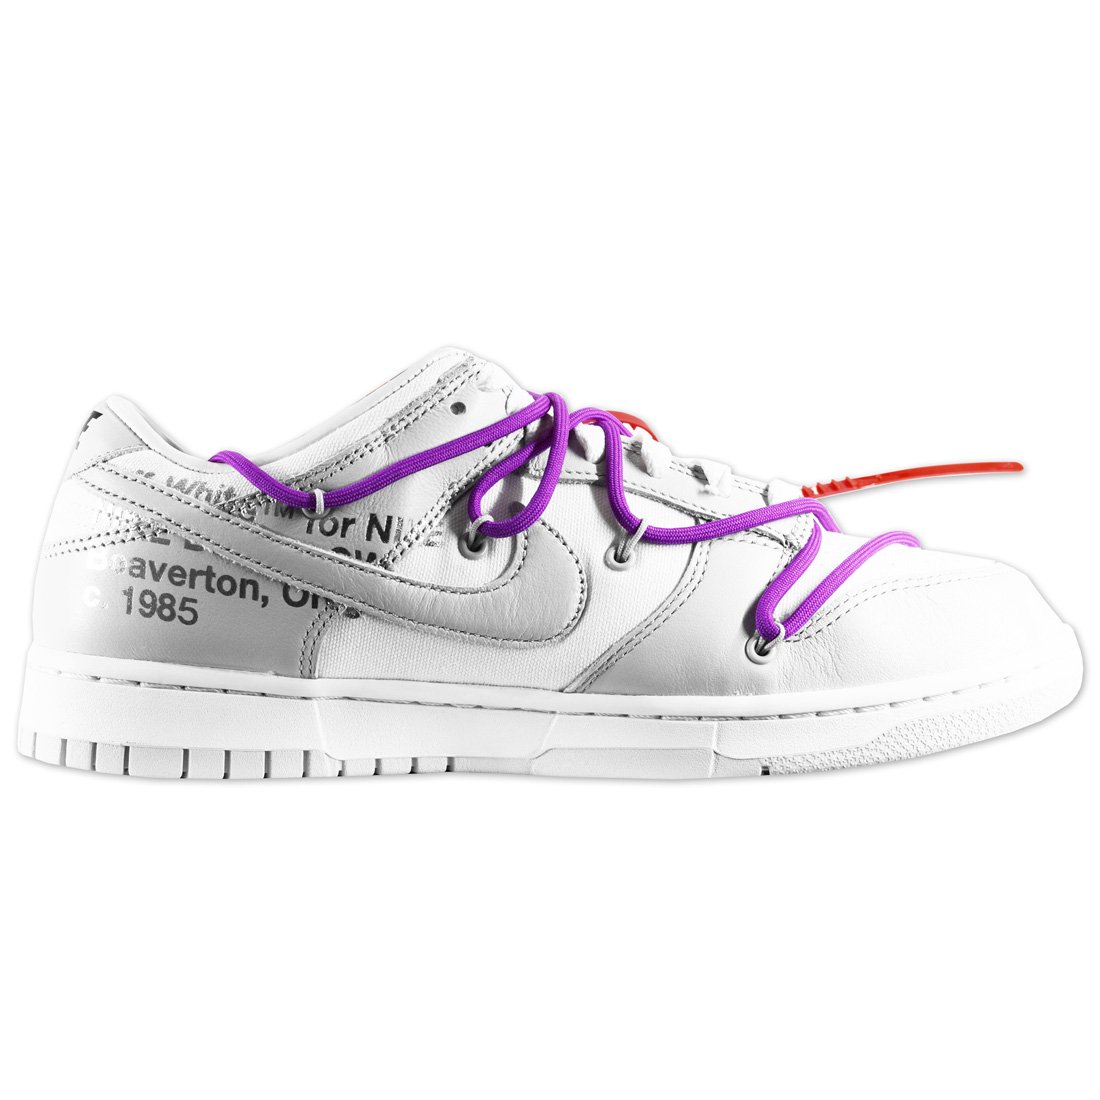 NIKE X OFF-WHITE DUNK LOW 1 OF 50 